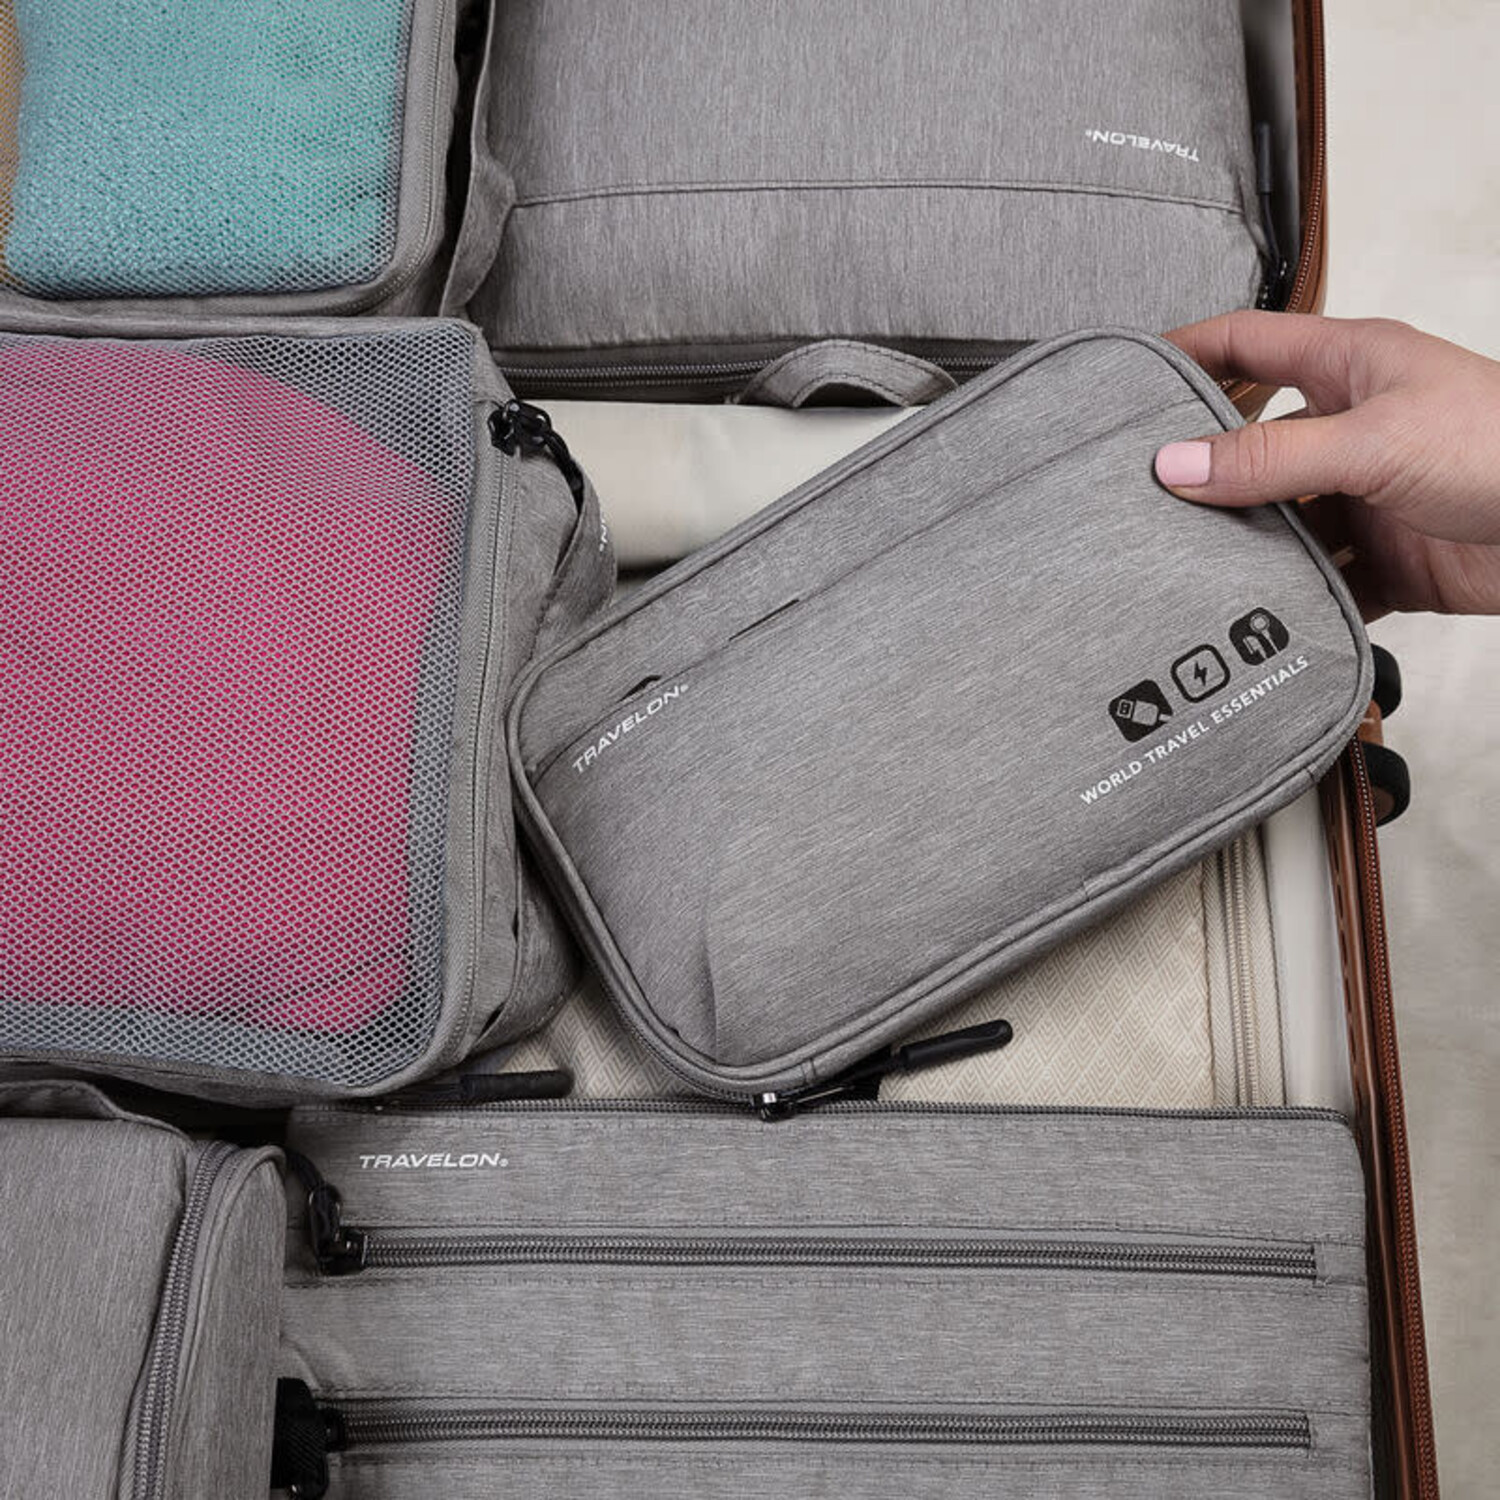 3 Organizer Pouches for Your Everyday Essentials - VANQUEST BLOG & NEWS